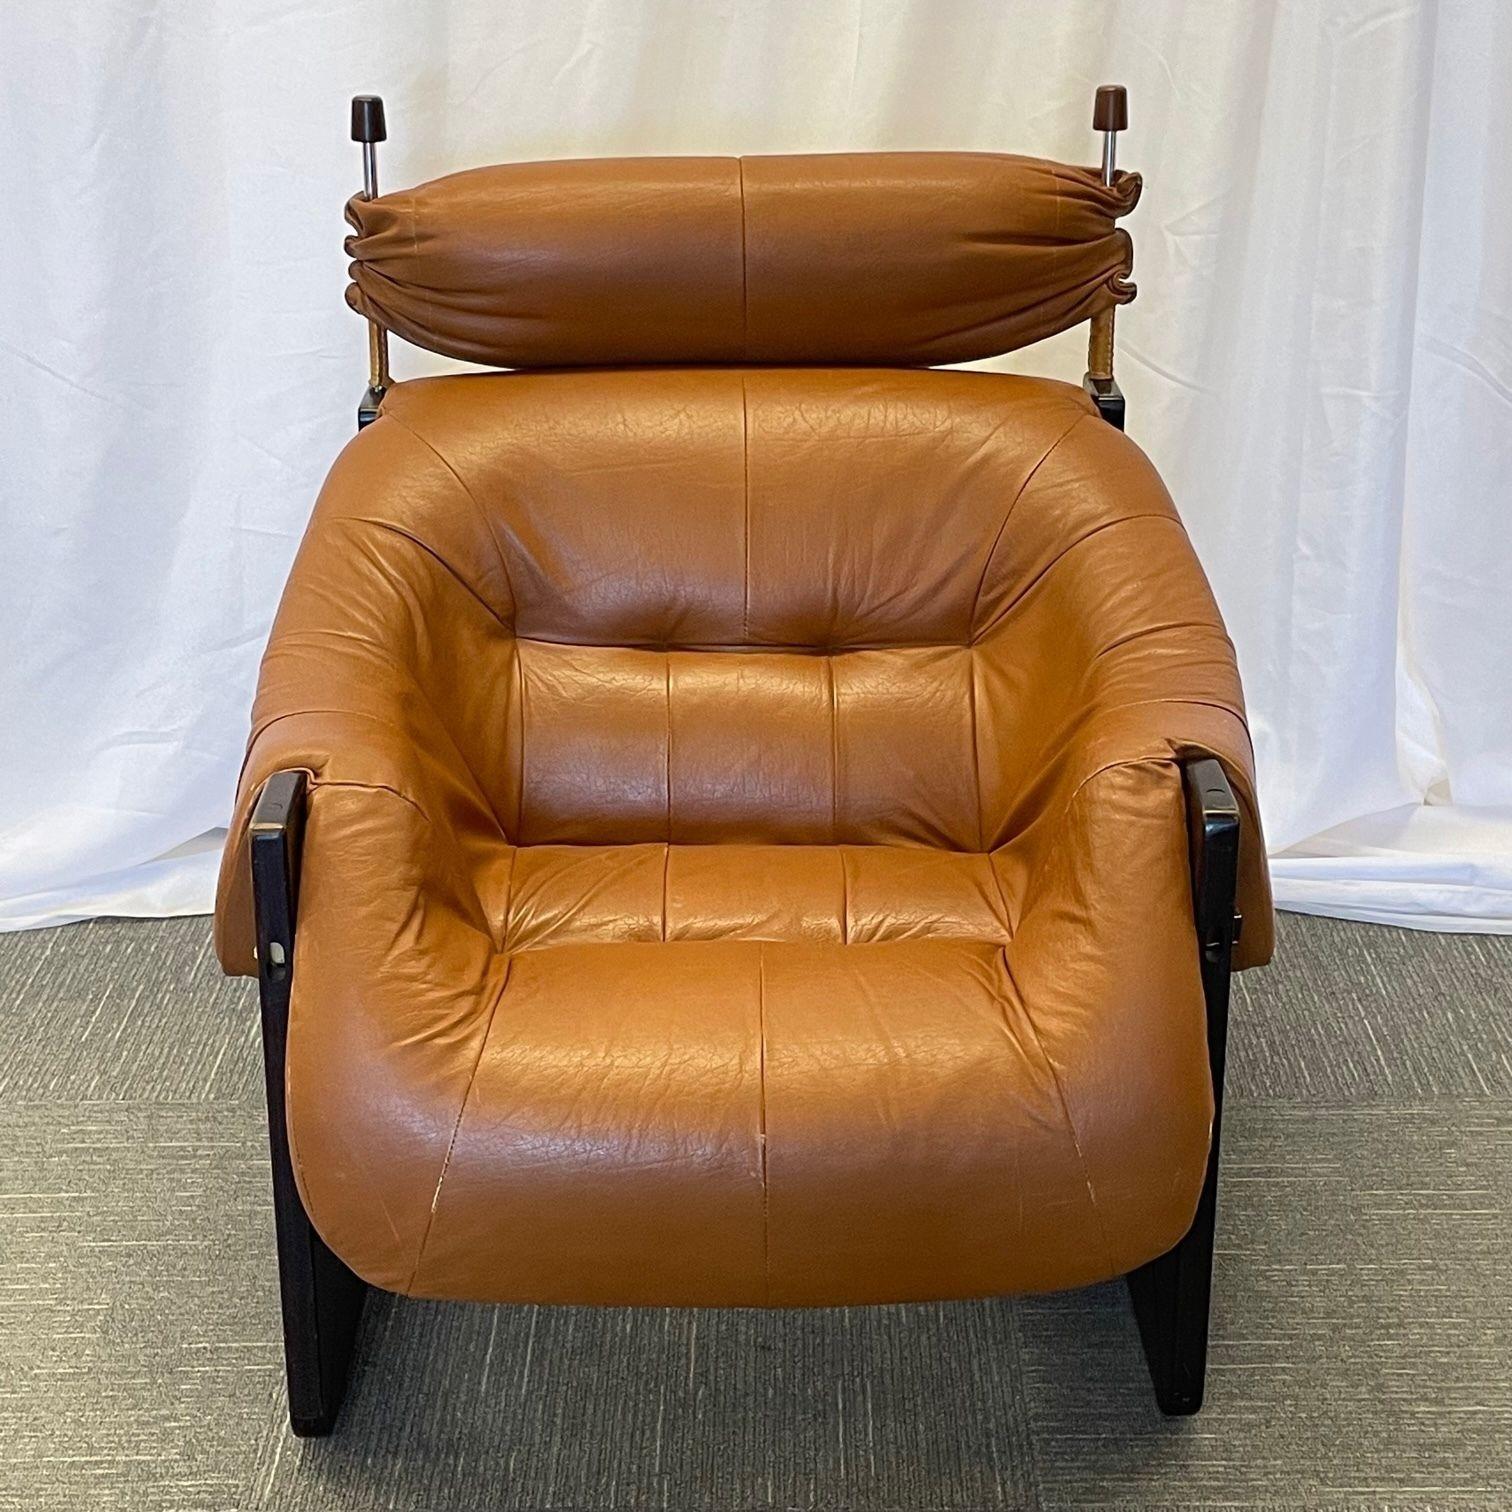 Leather Mid-Century Modern Percival Lafer Lounge Chairs, Ottoman, Brazilian Rosewood